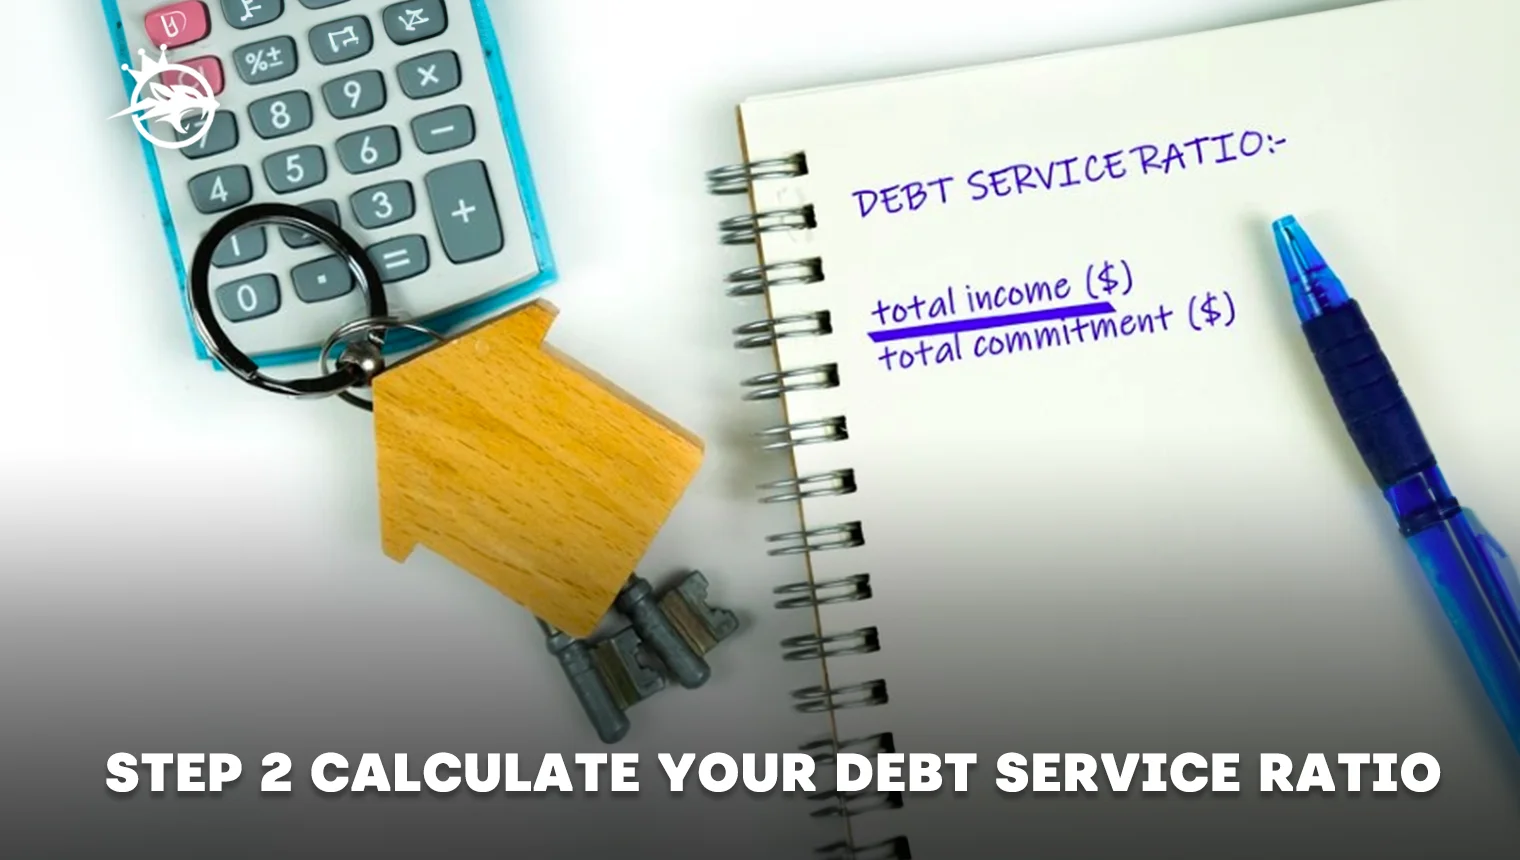 Step 2 Calculate your Debt service ratio